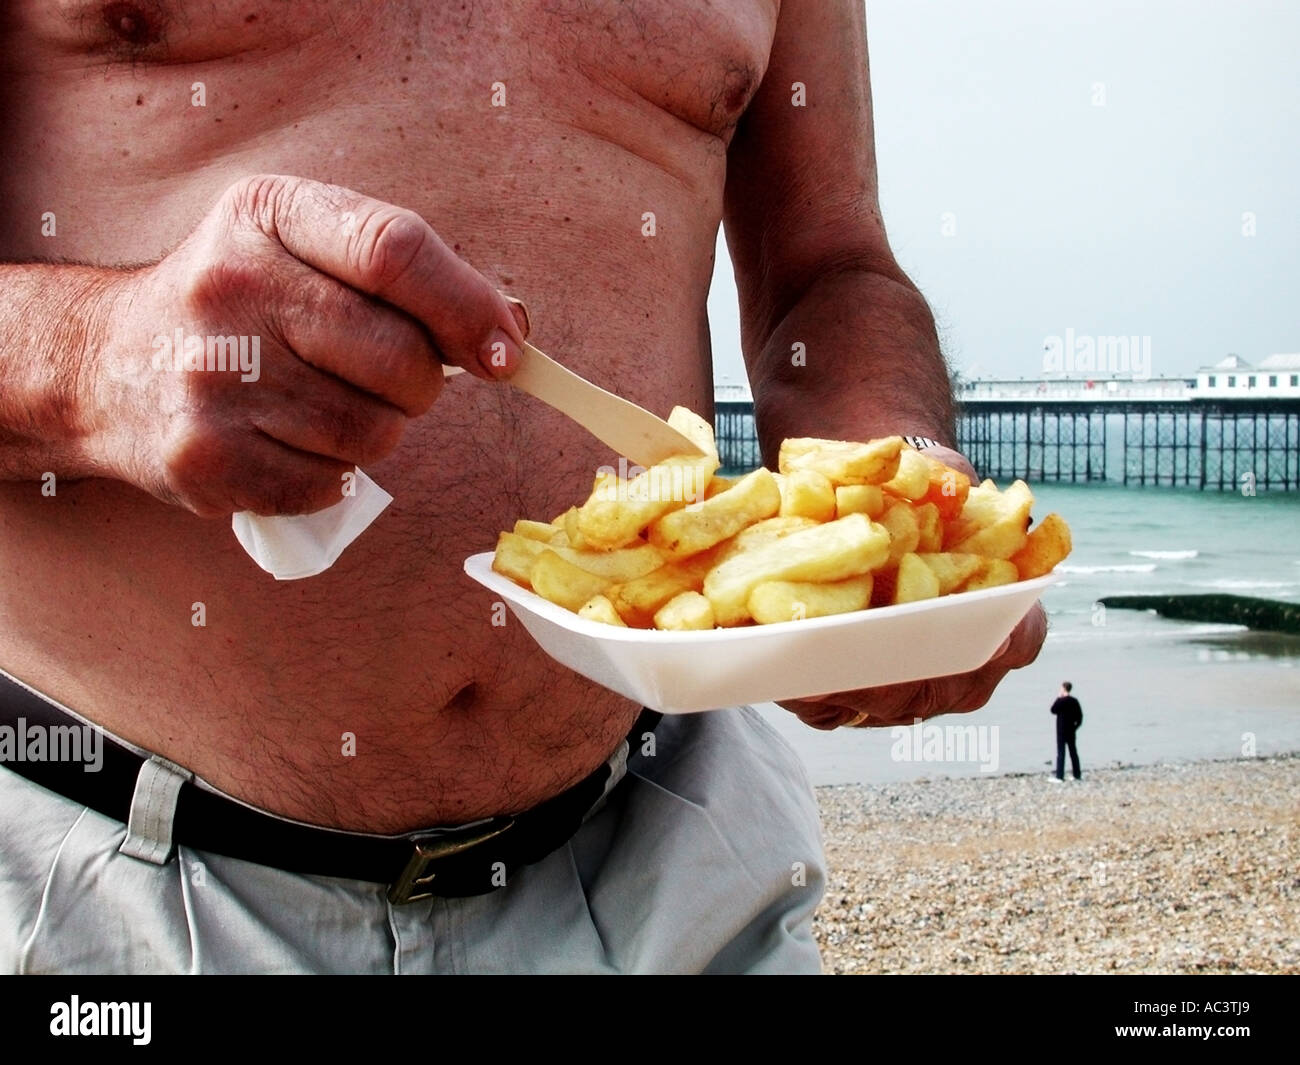 overweight-man-eating-chips-by-the-seasi